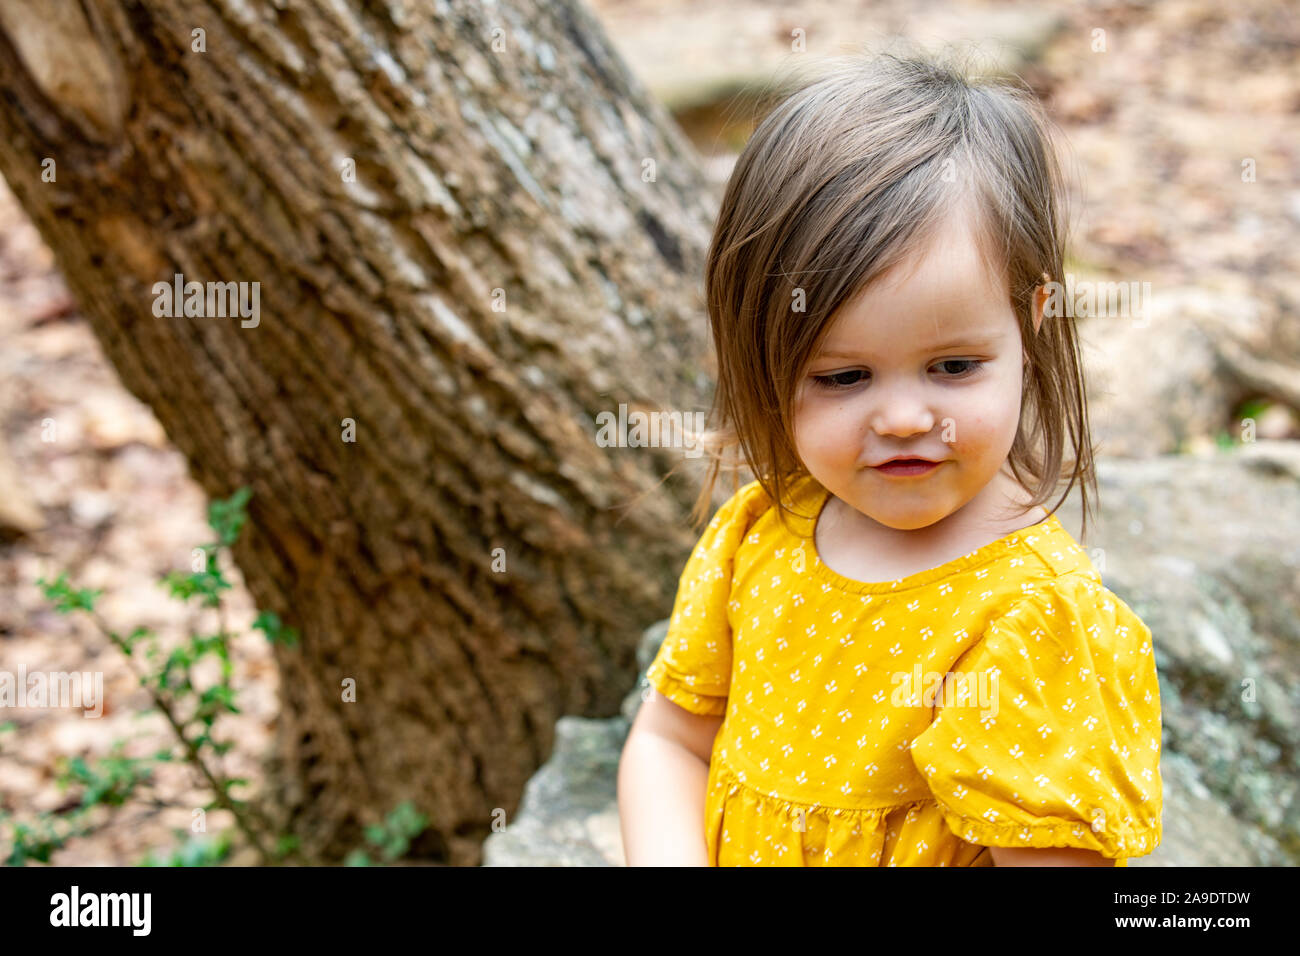 Toddler sitting on tree who is happy with what she has discovered Stock Photo